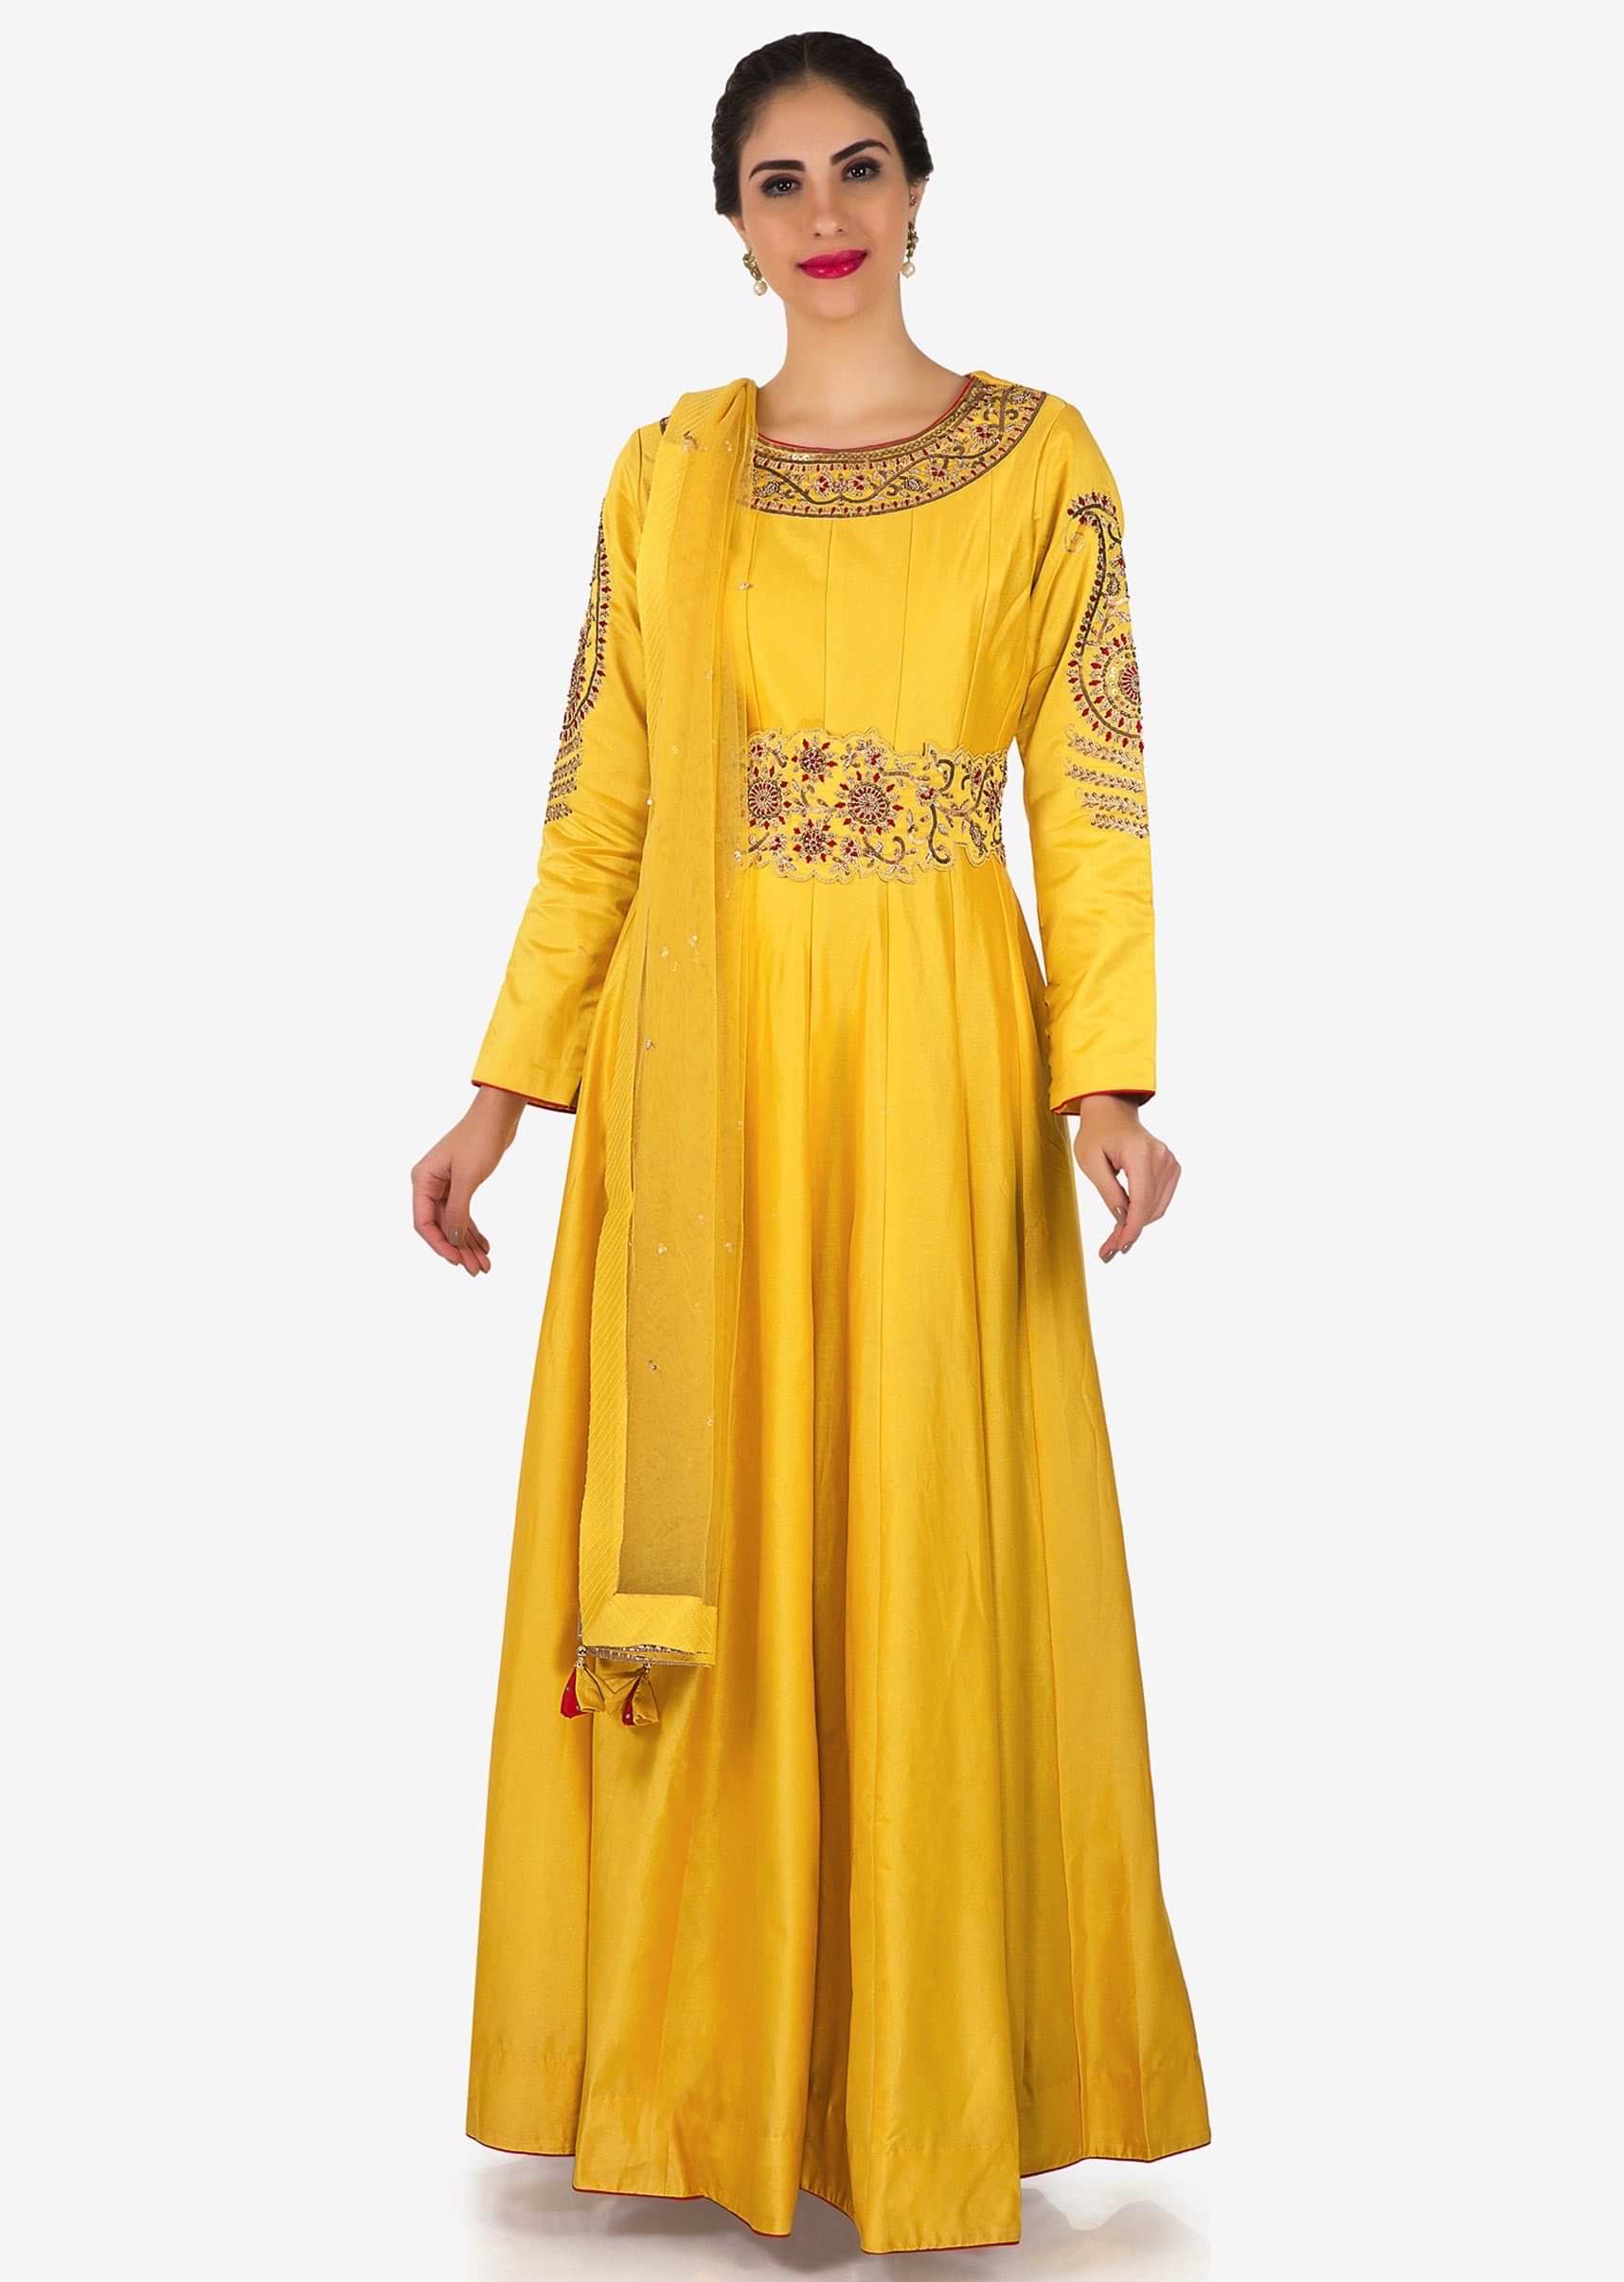 Chrome yellow anarkali suit in silk with french knot embroidered neckline only on Kalki